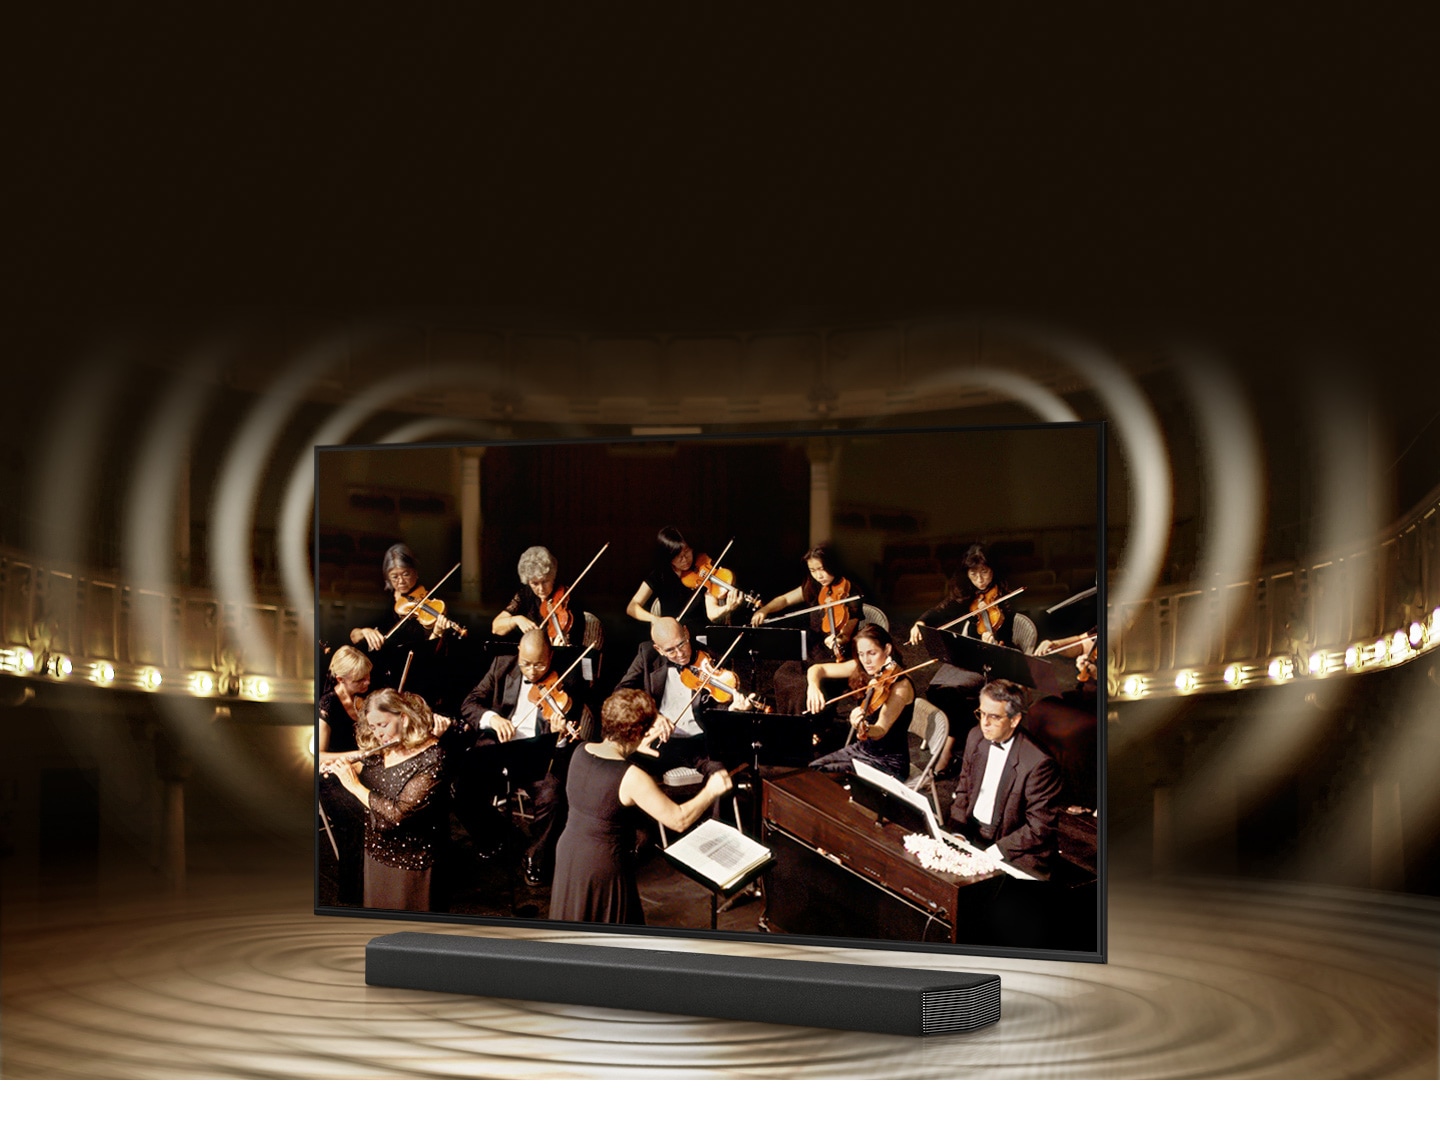 Simulated sound wave graphics from TV and soundbar demonstrate Q Symphony technology as they play sound together.